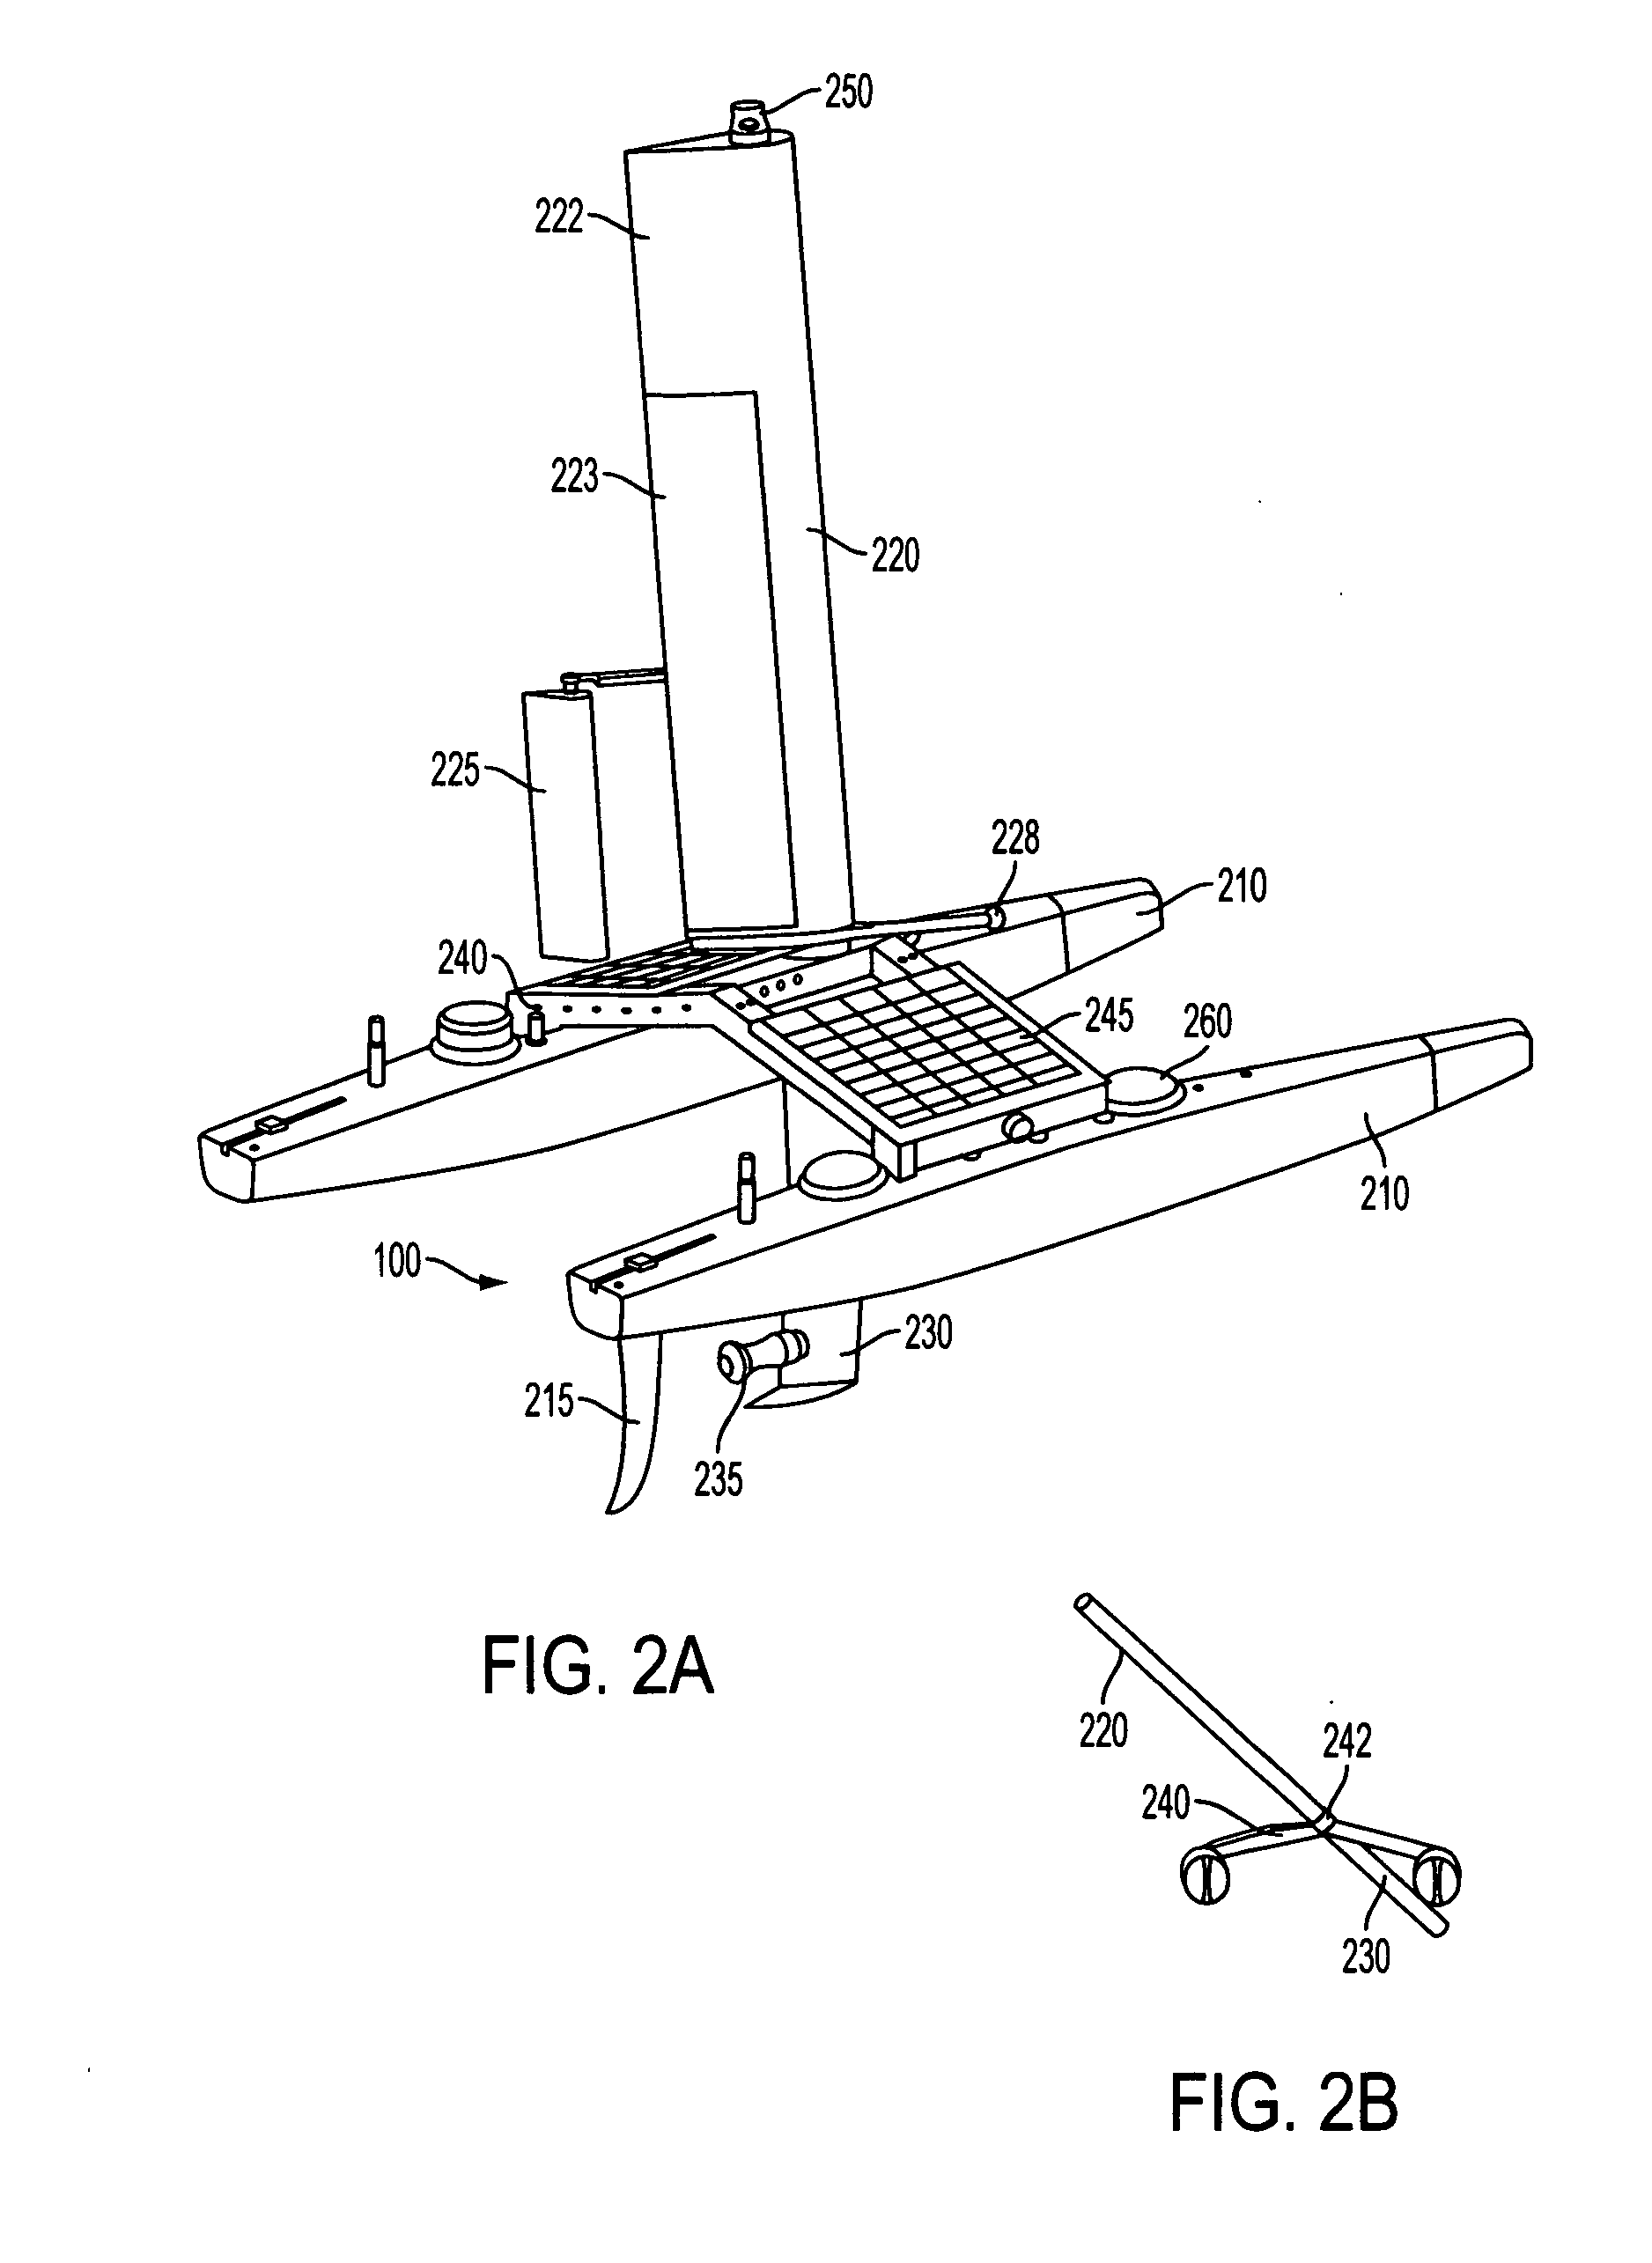 System and Method for Control of Autonomous Marine Vessels